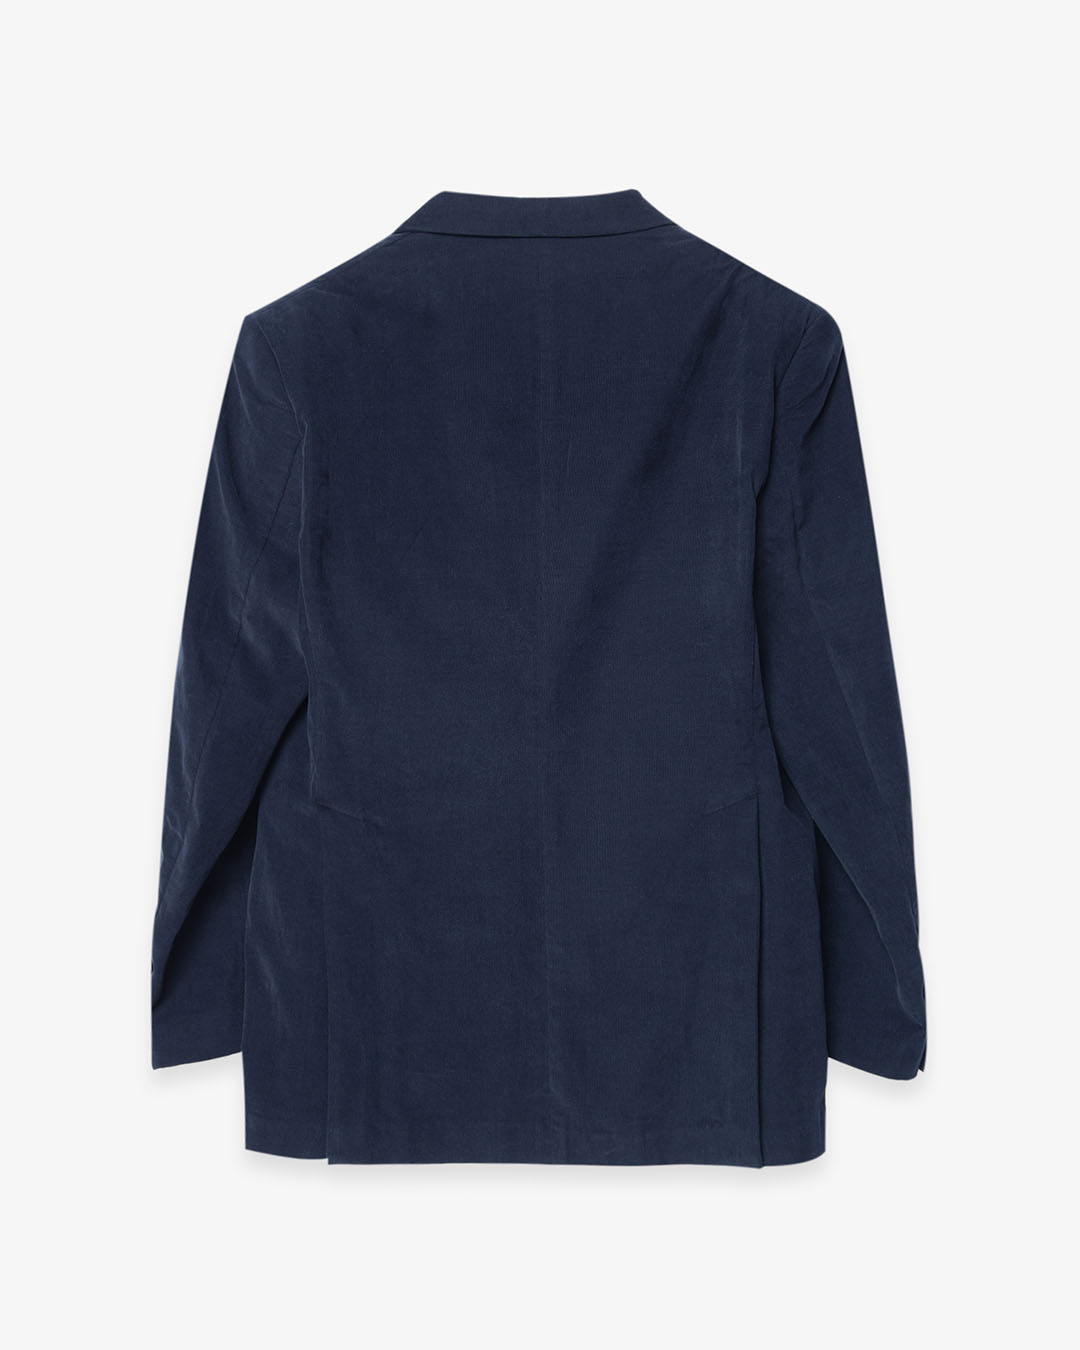 CORDUROY DOUBLE BREASTED JACKET (NAVY)